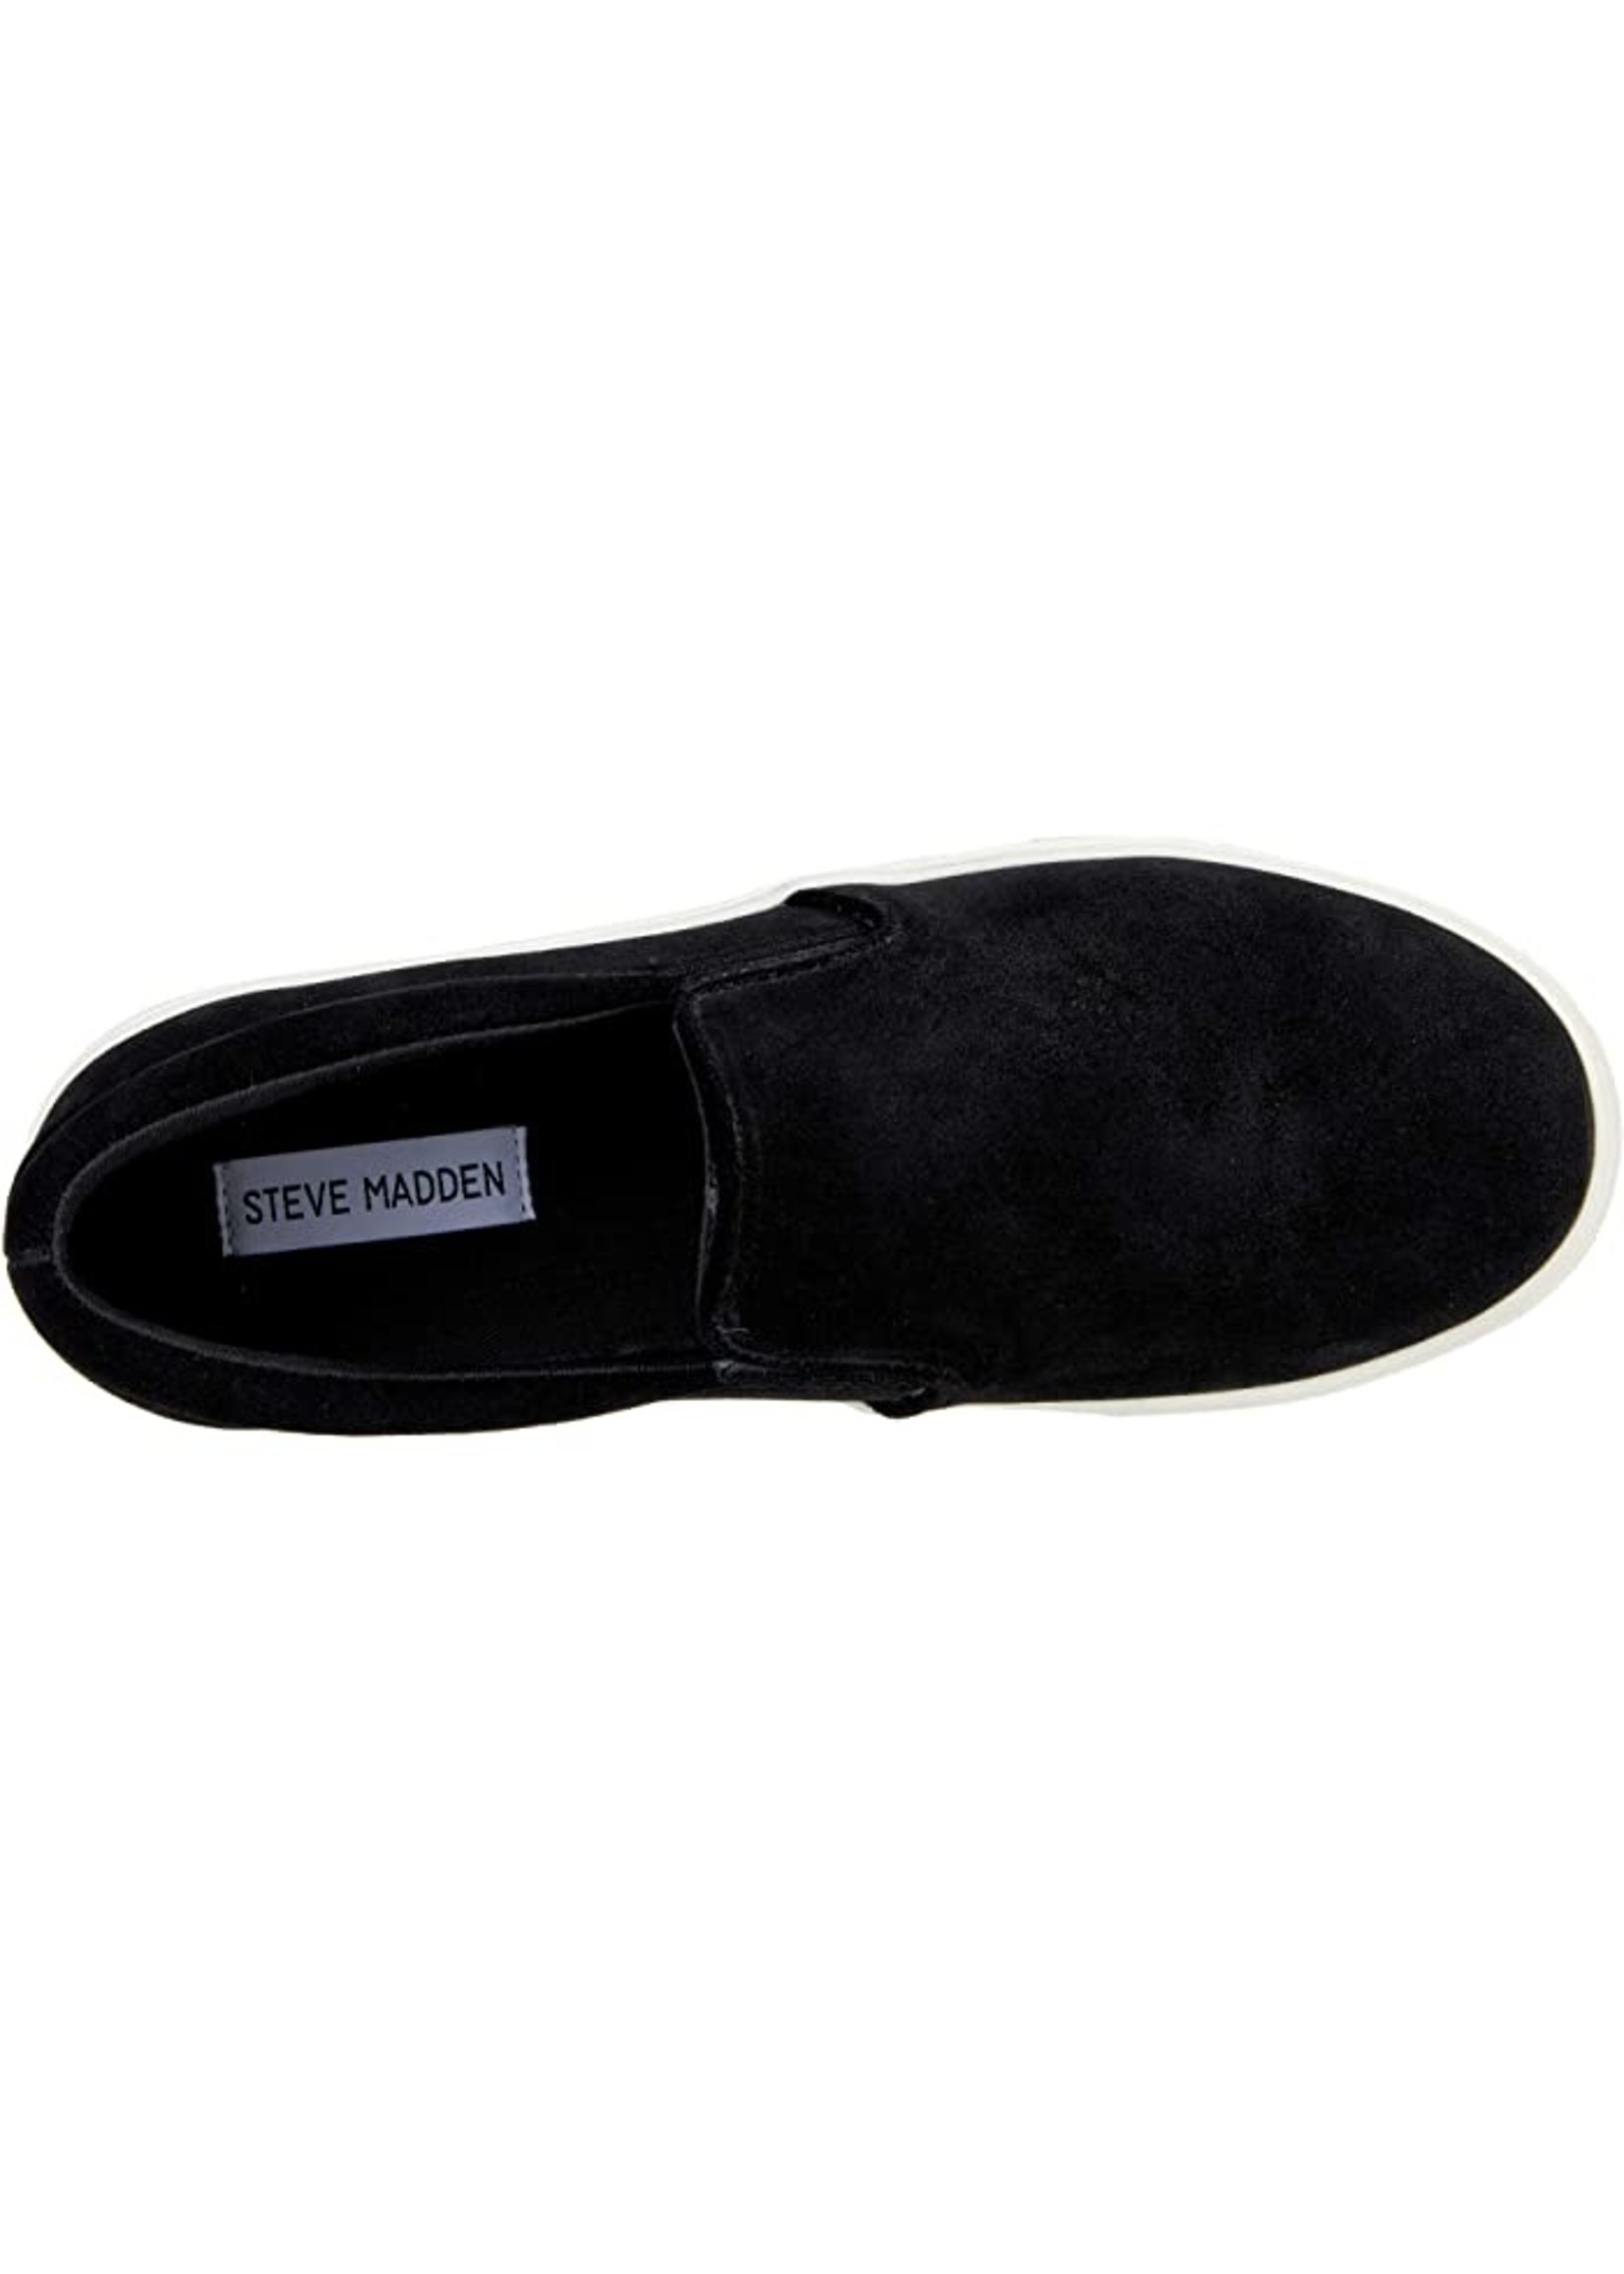 Steve Madden Coulter Black Suede by Steve Madden 7.5 Only Final Sale No Box